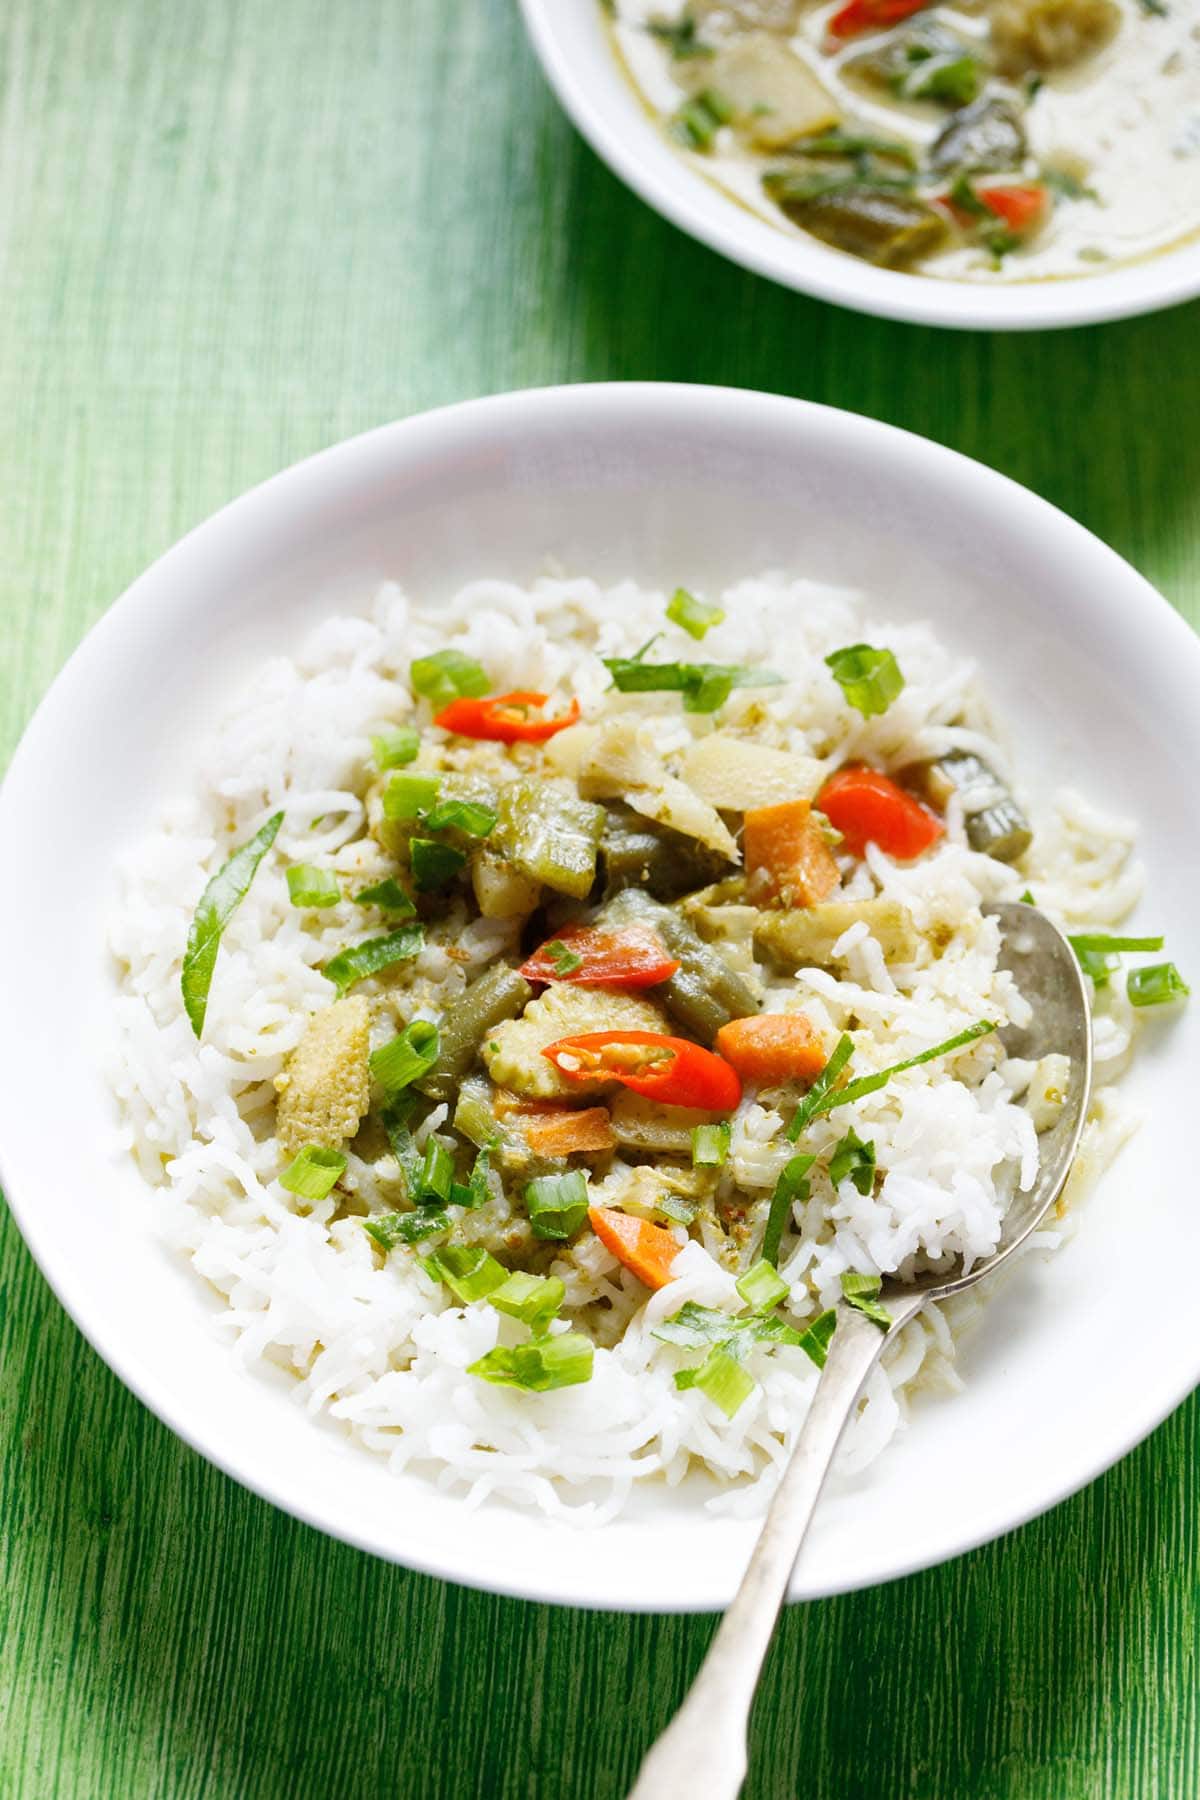 thai green curry served on a bed of steamed white rice on a white plate with a spoon.